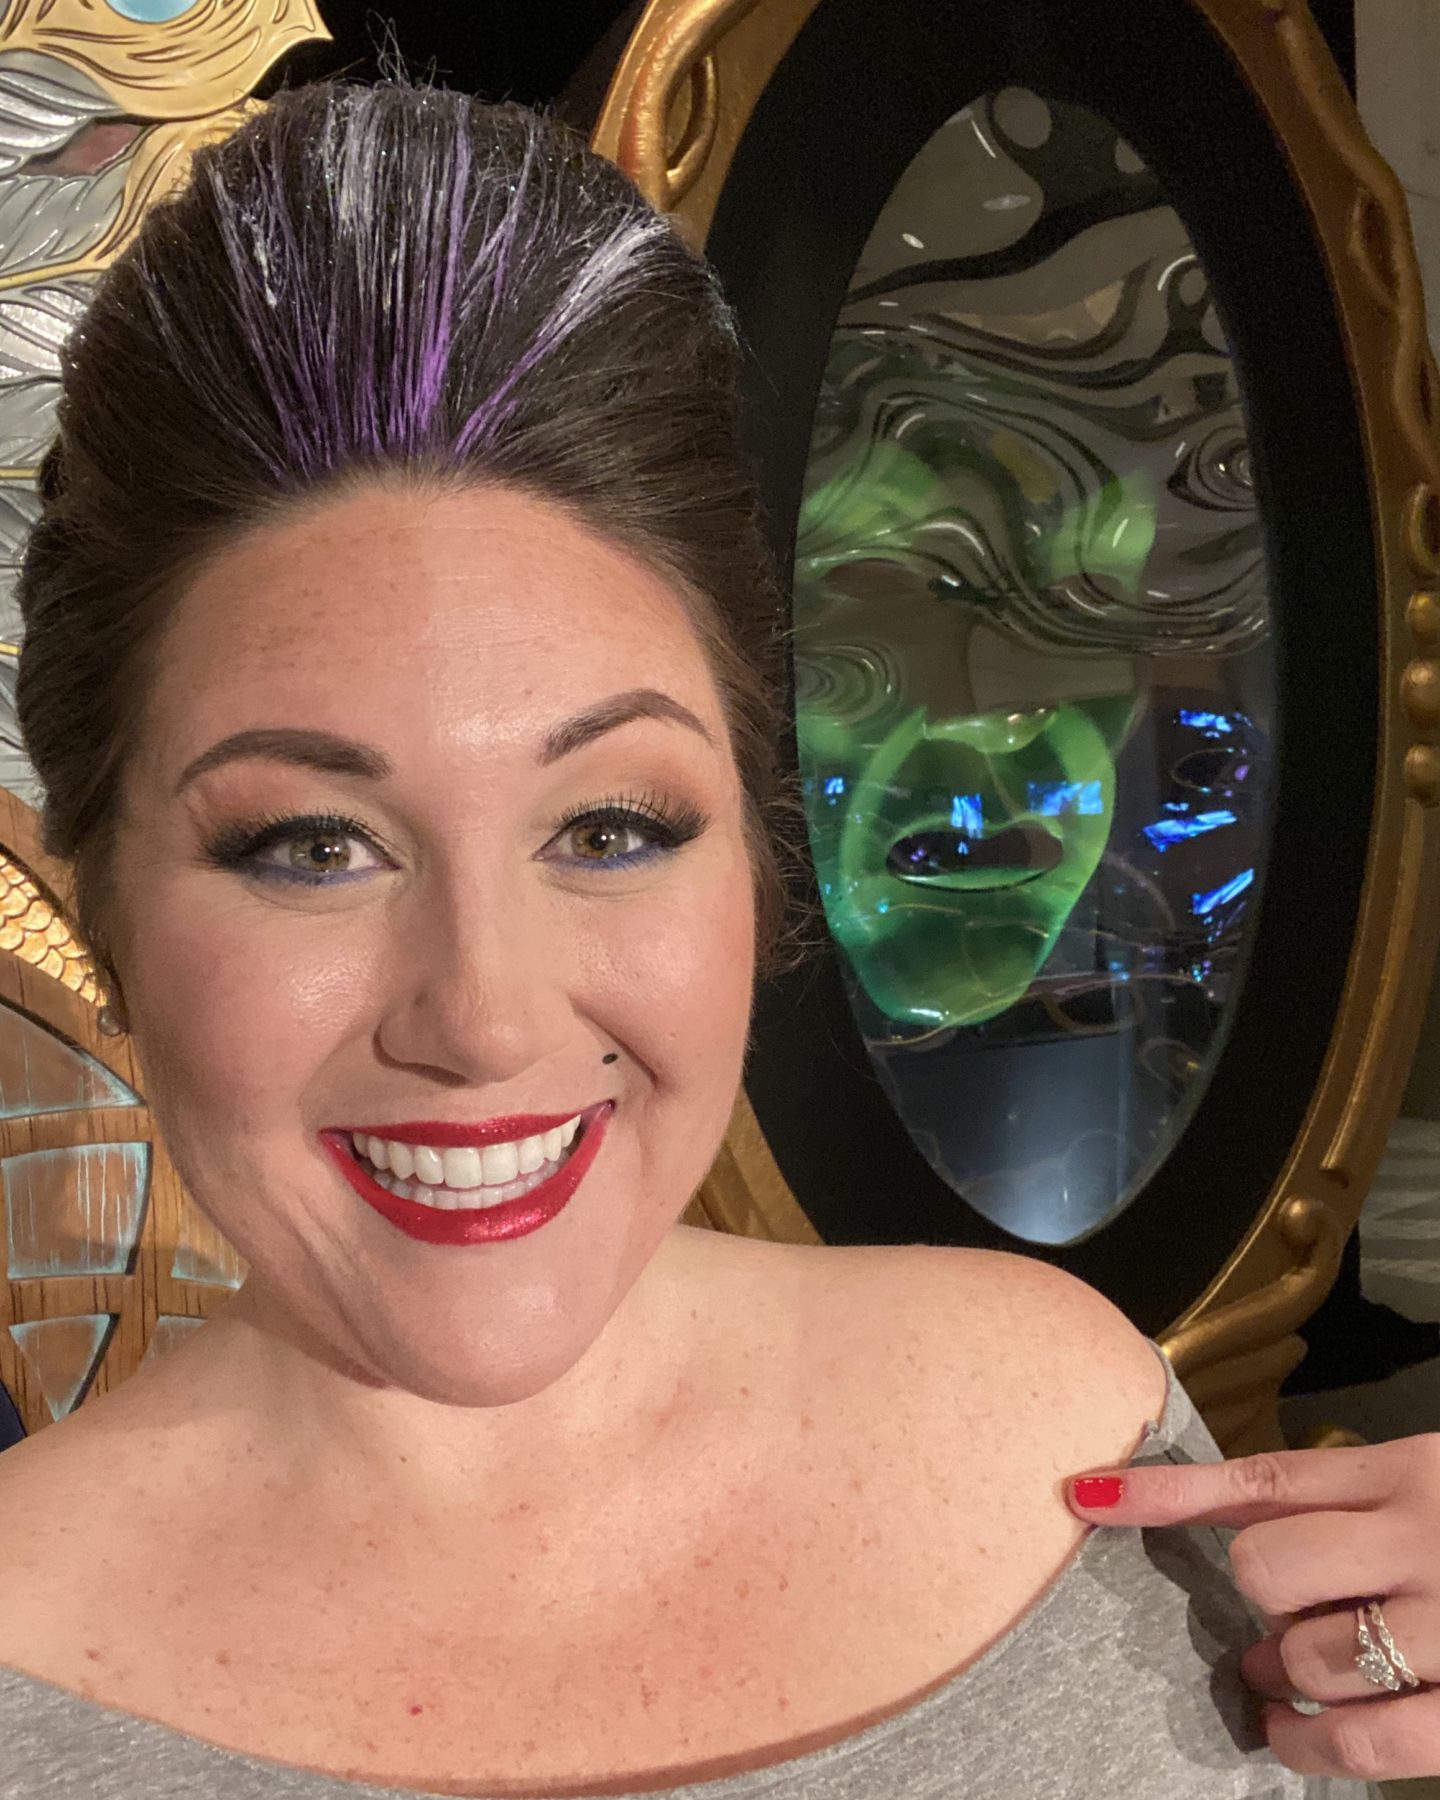 Character Couture Makeovers for Adults at Walt Disney World